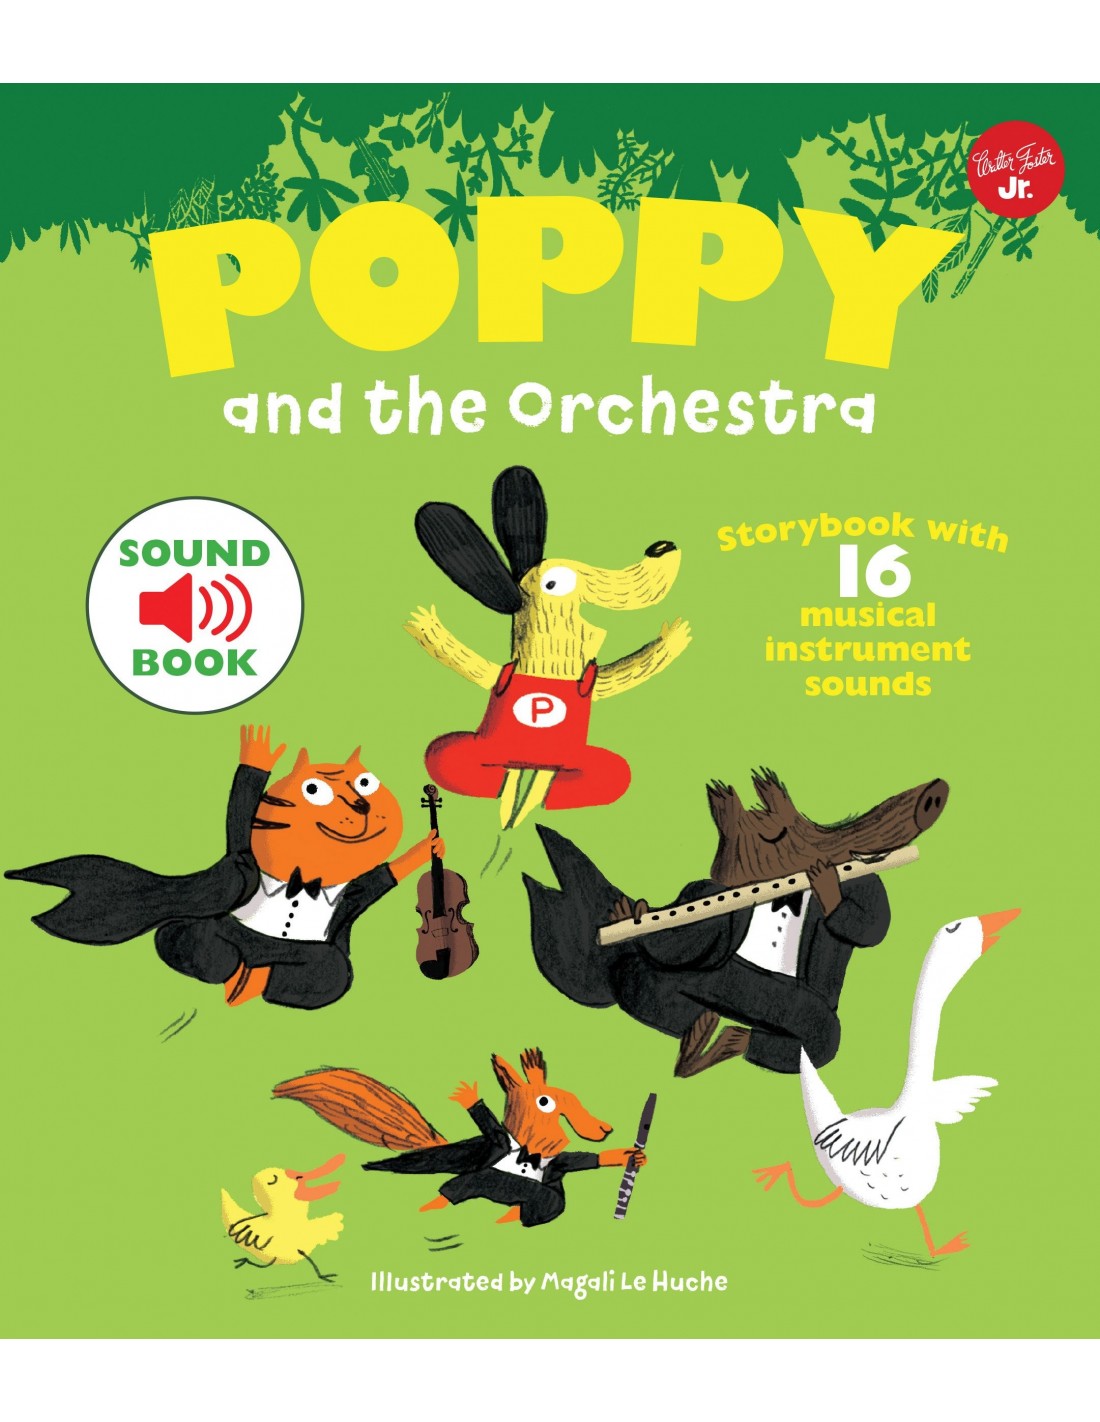 Poppy and the Orchestra : With 16 musical instrument sounds!